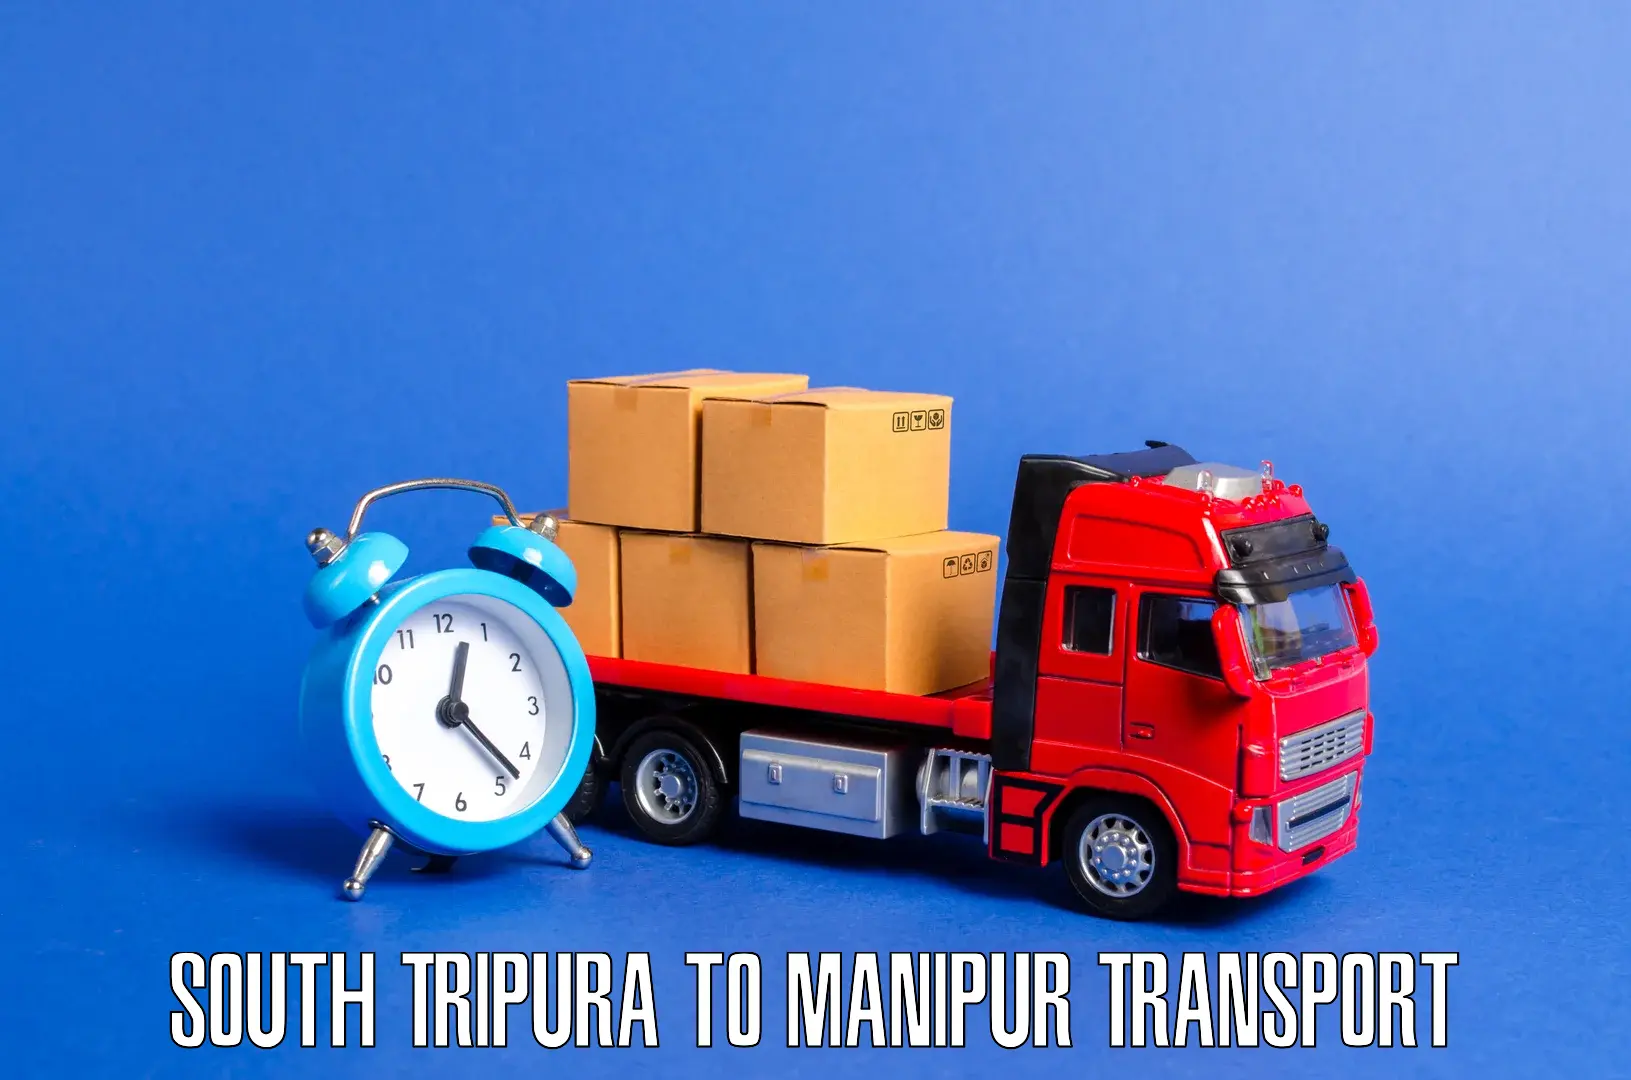 Nationwide transport services South Tripura to Manipur